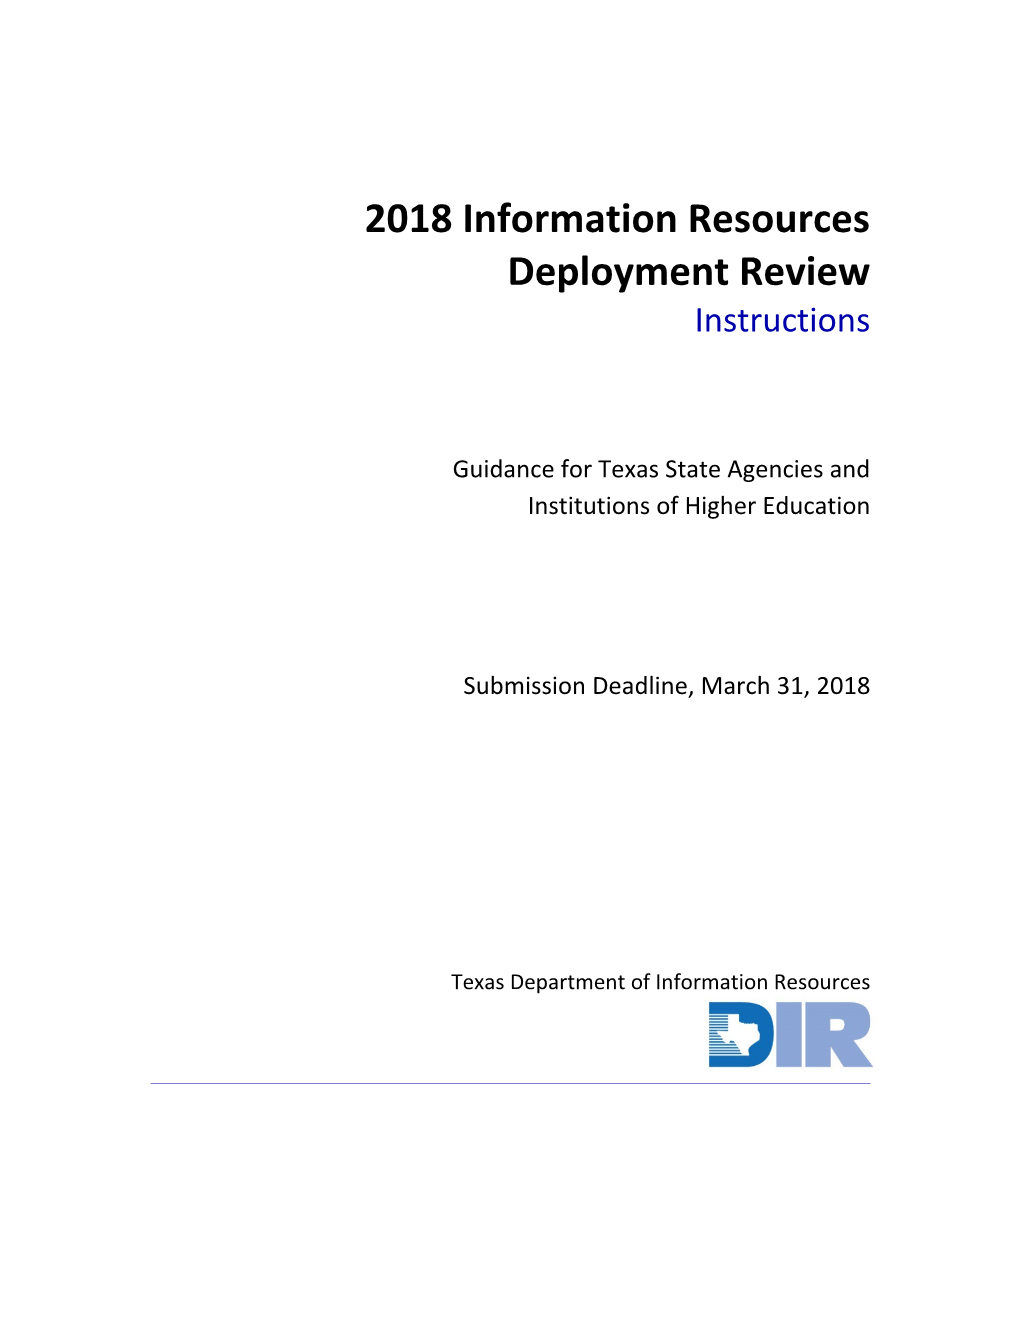 2018 Information Resources Deployment Review